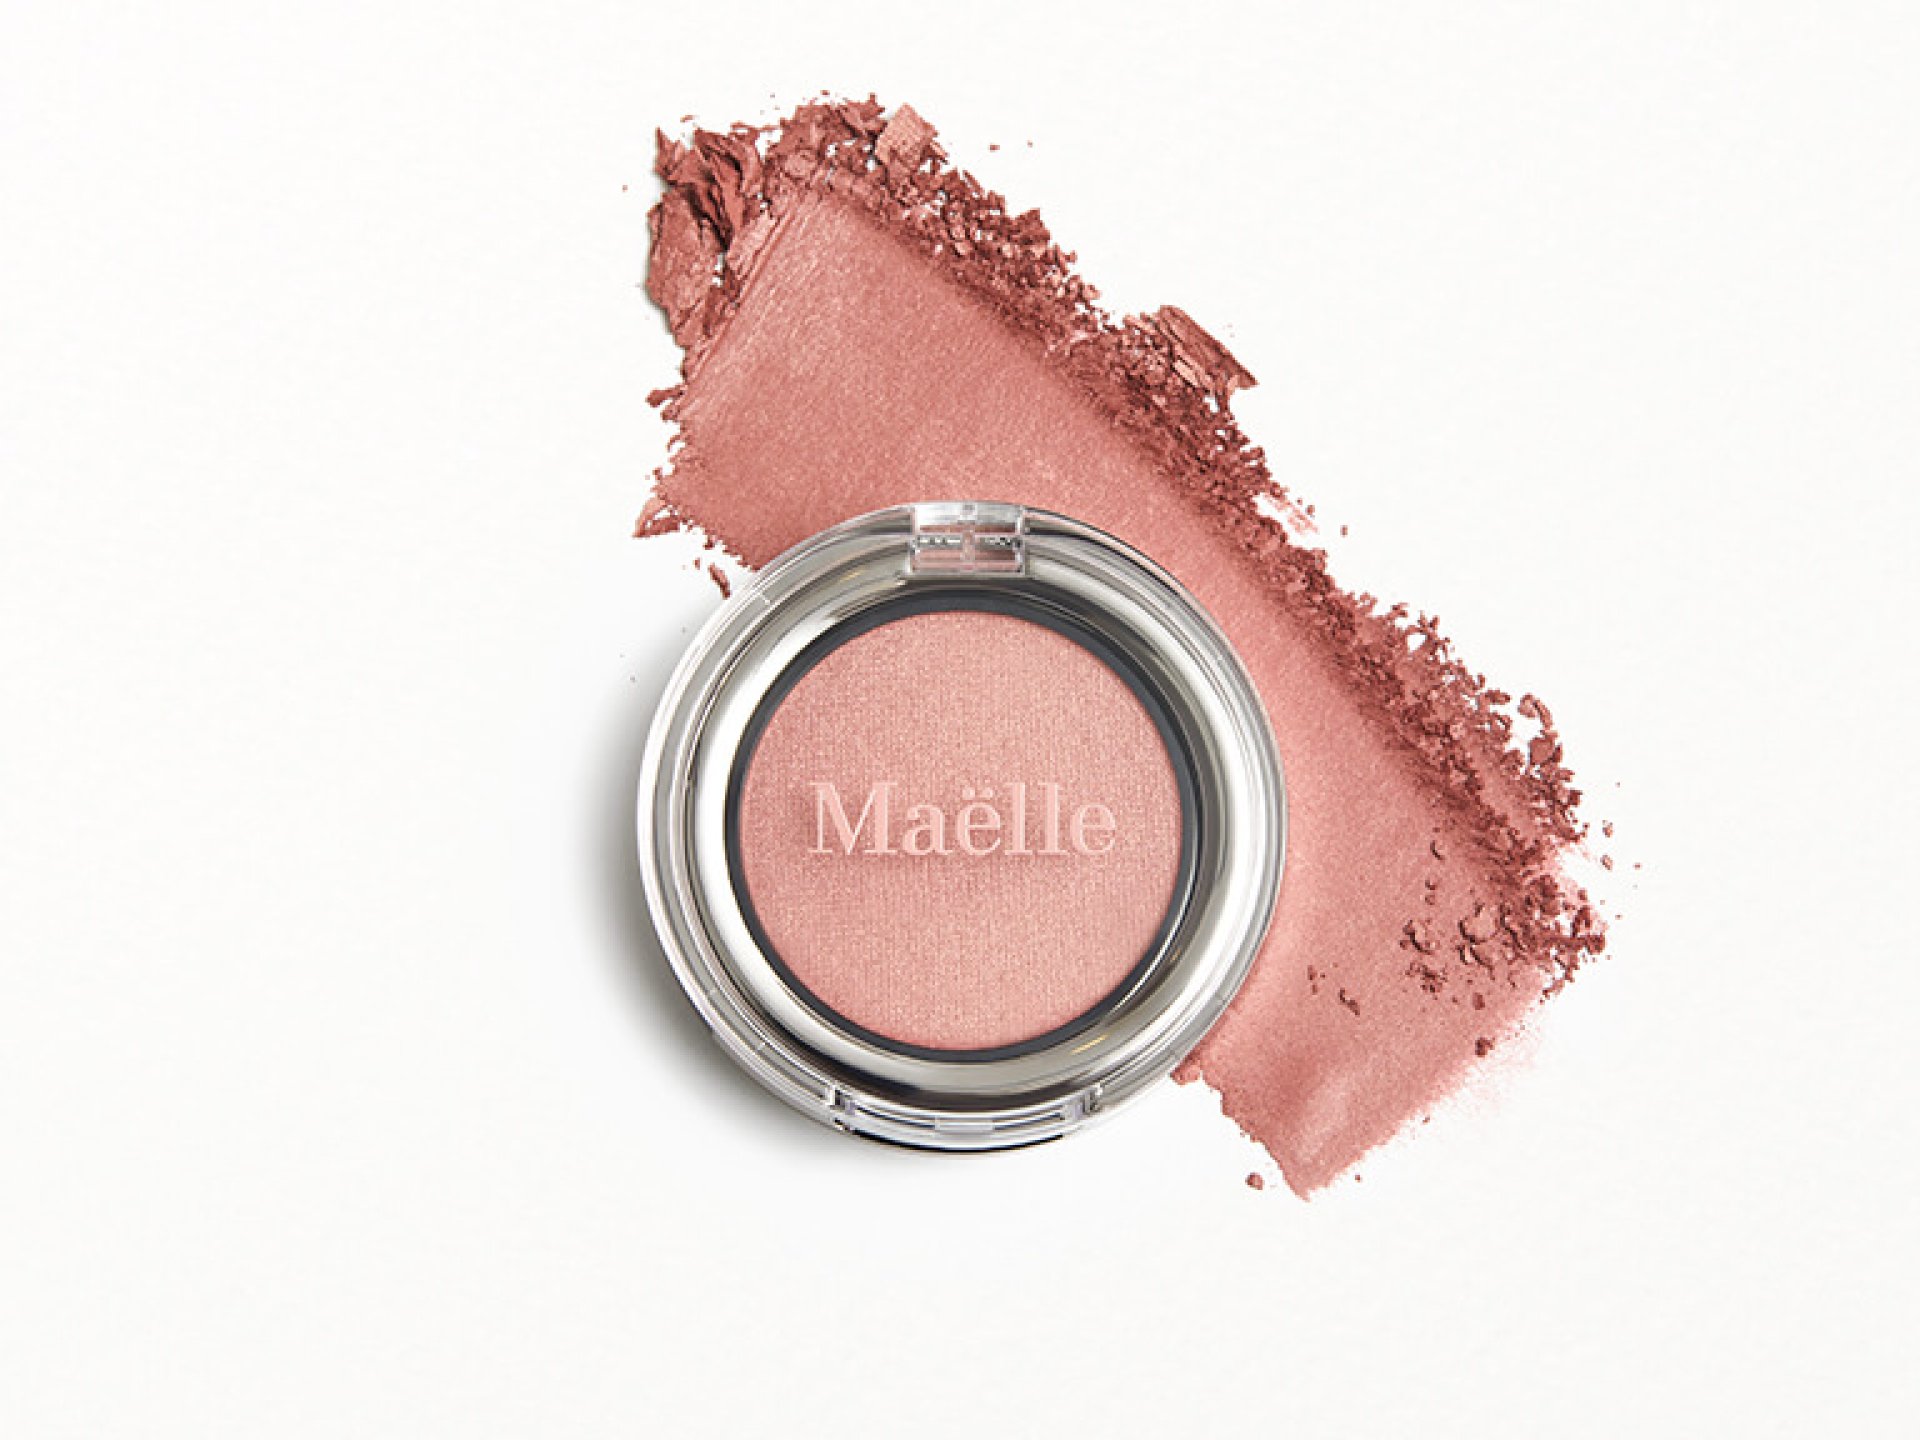 MAËLLE BEAUTY Sunkissed Blush Single in Golden Hour